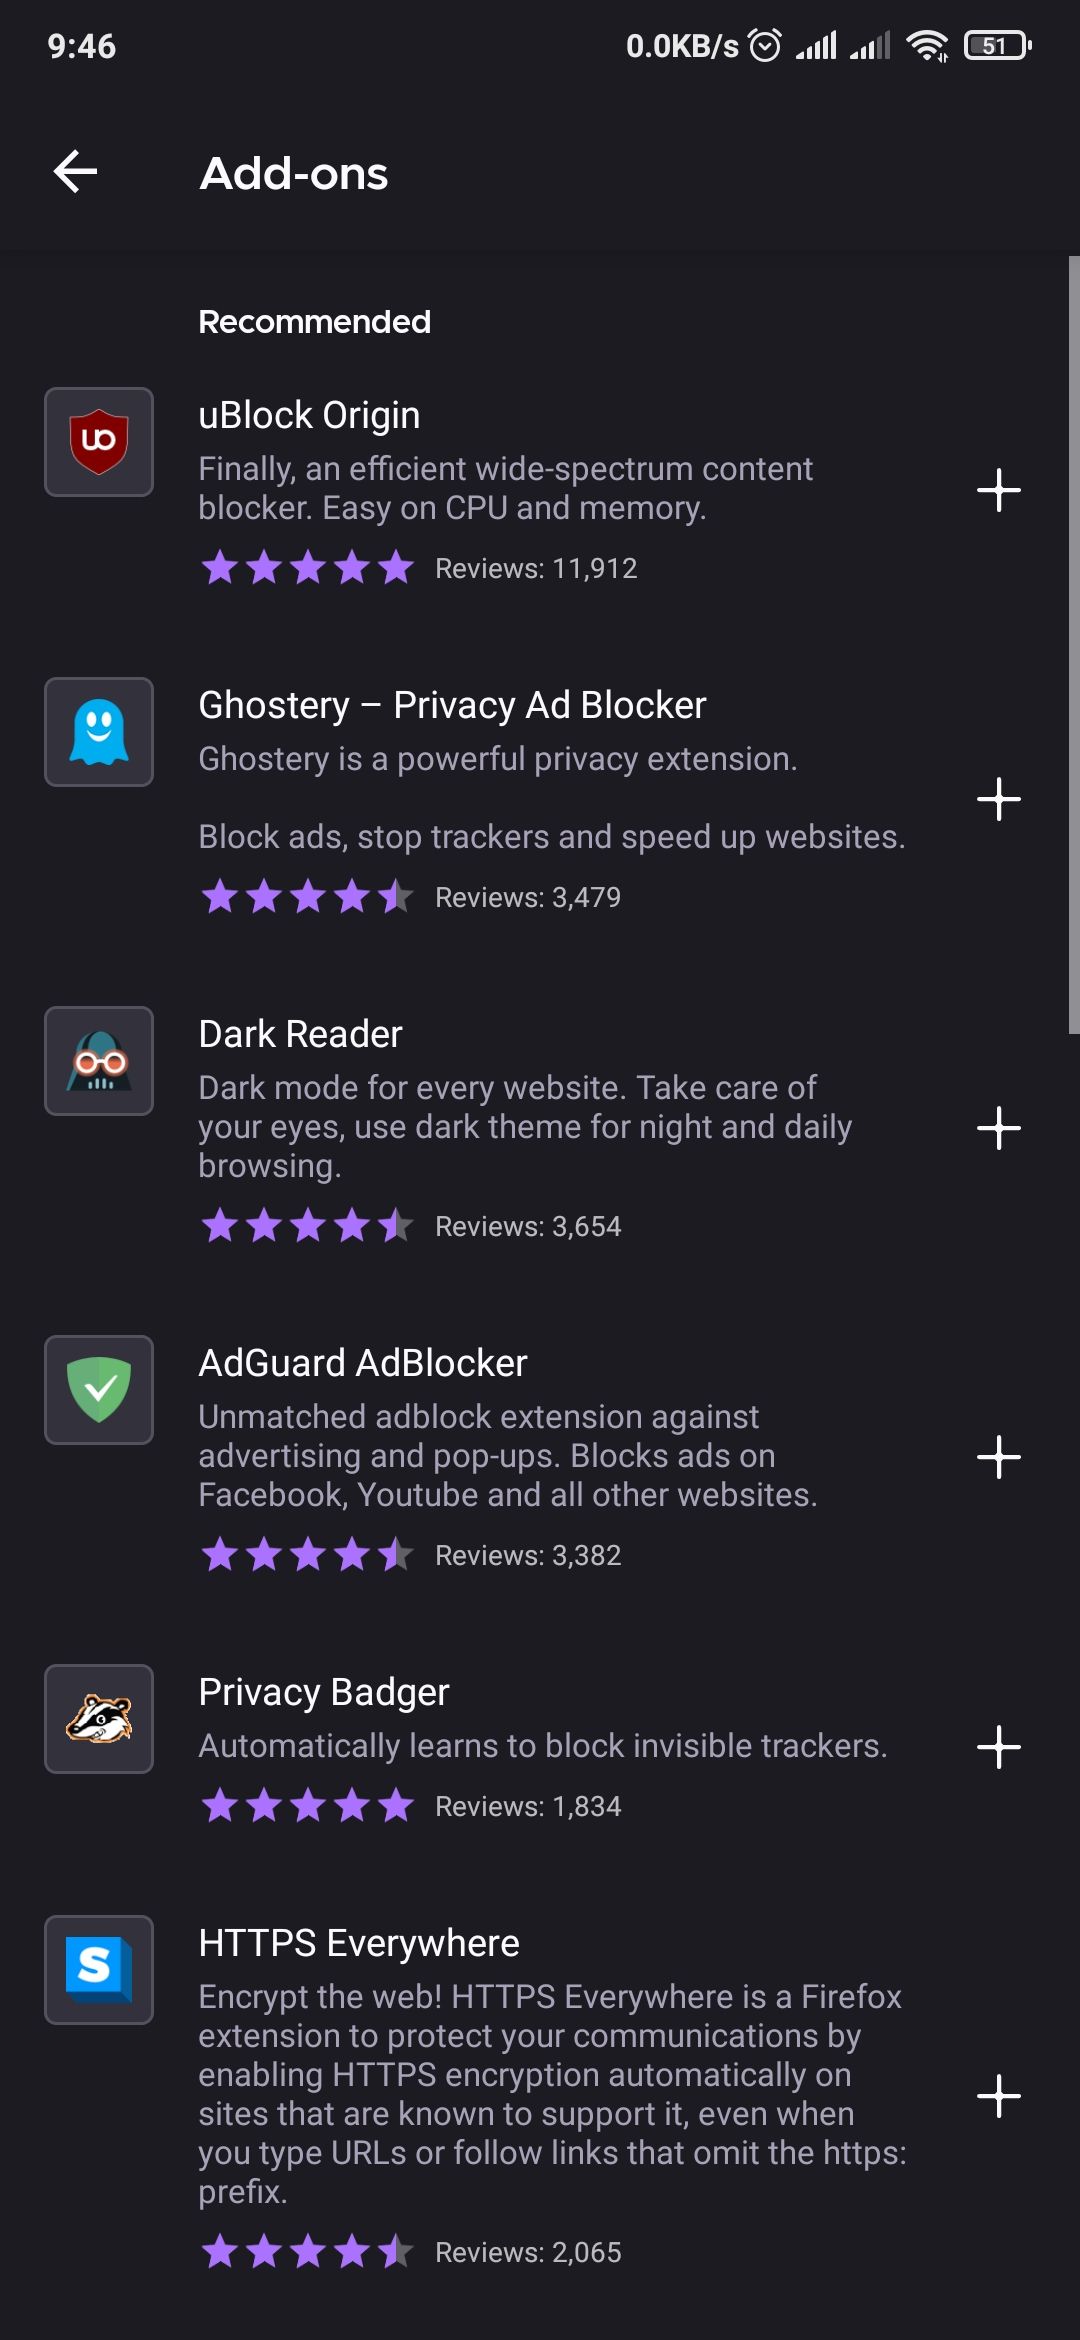 Enabled add-ons section in Firefox Android